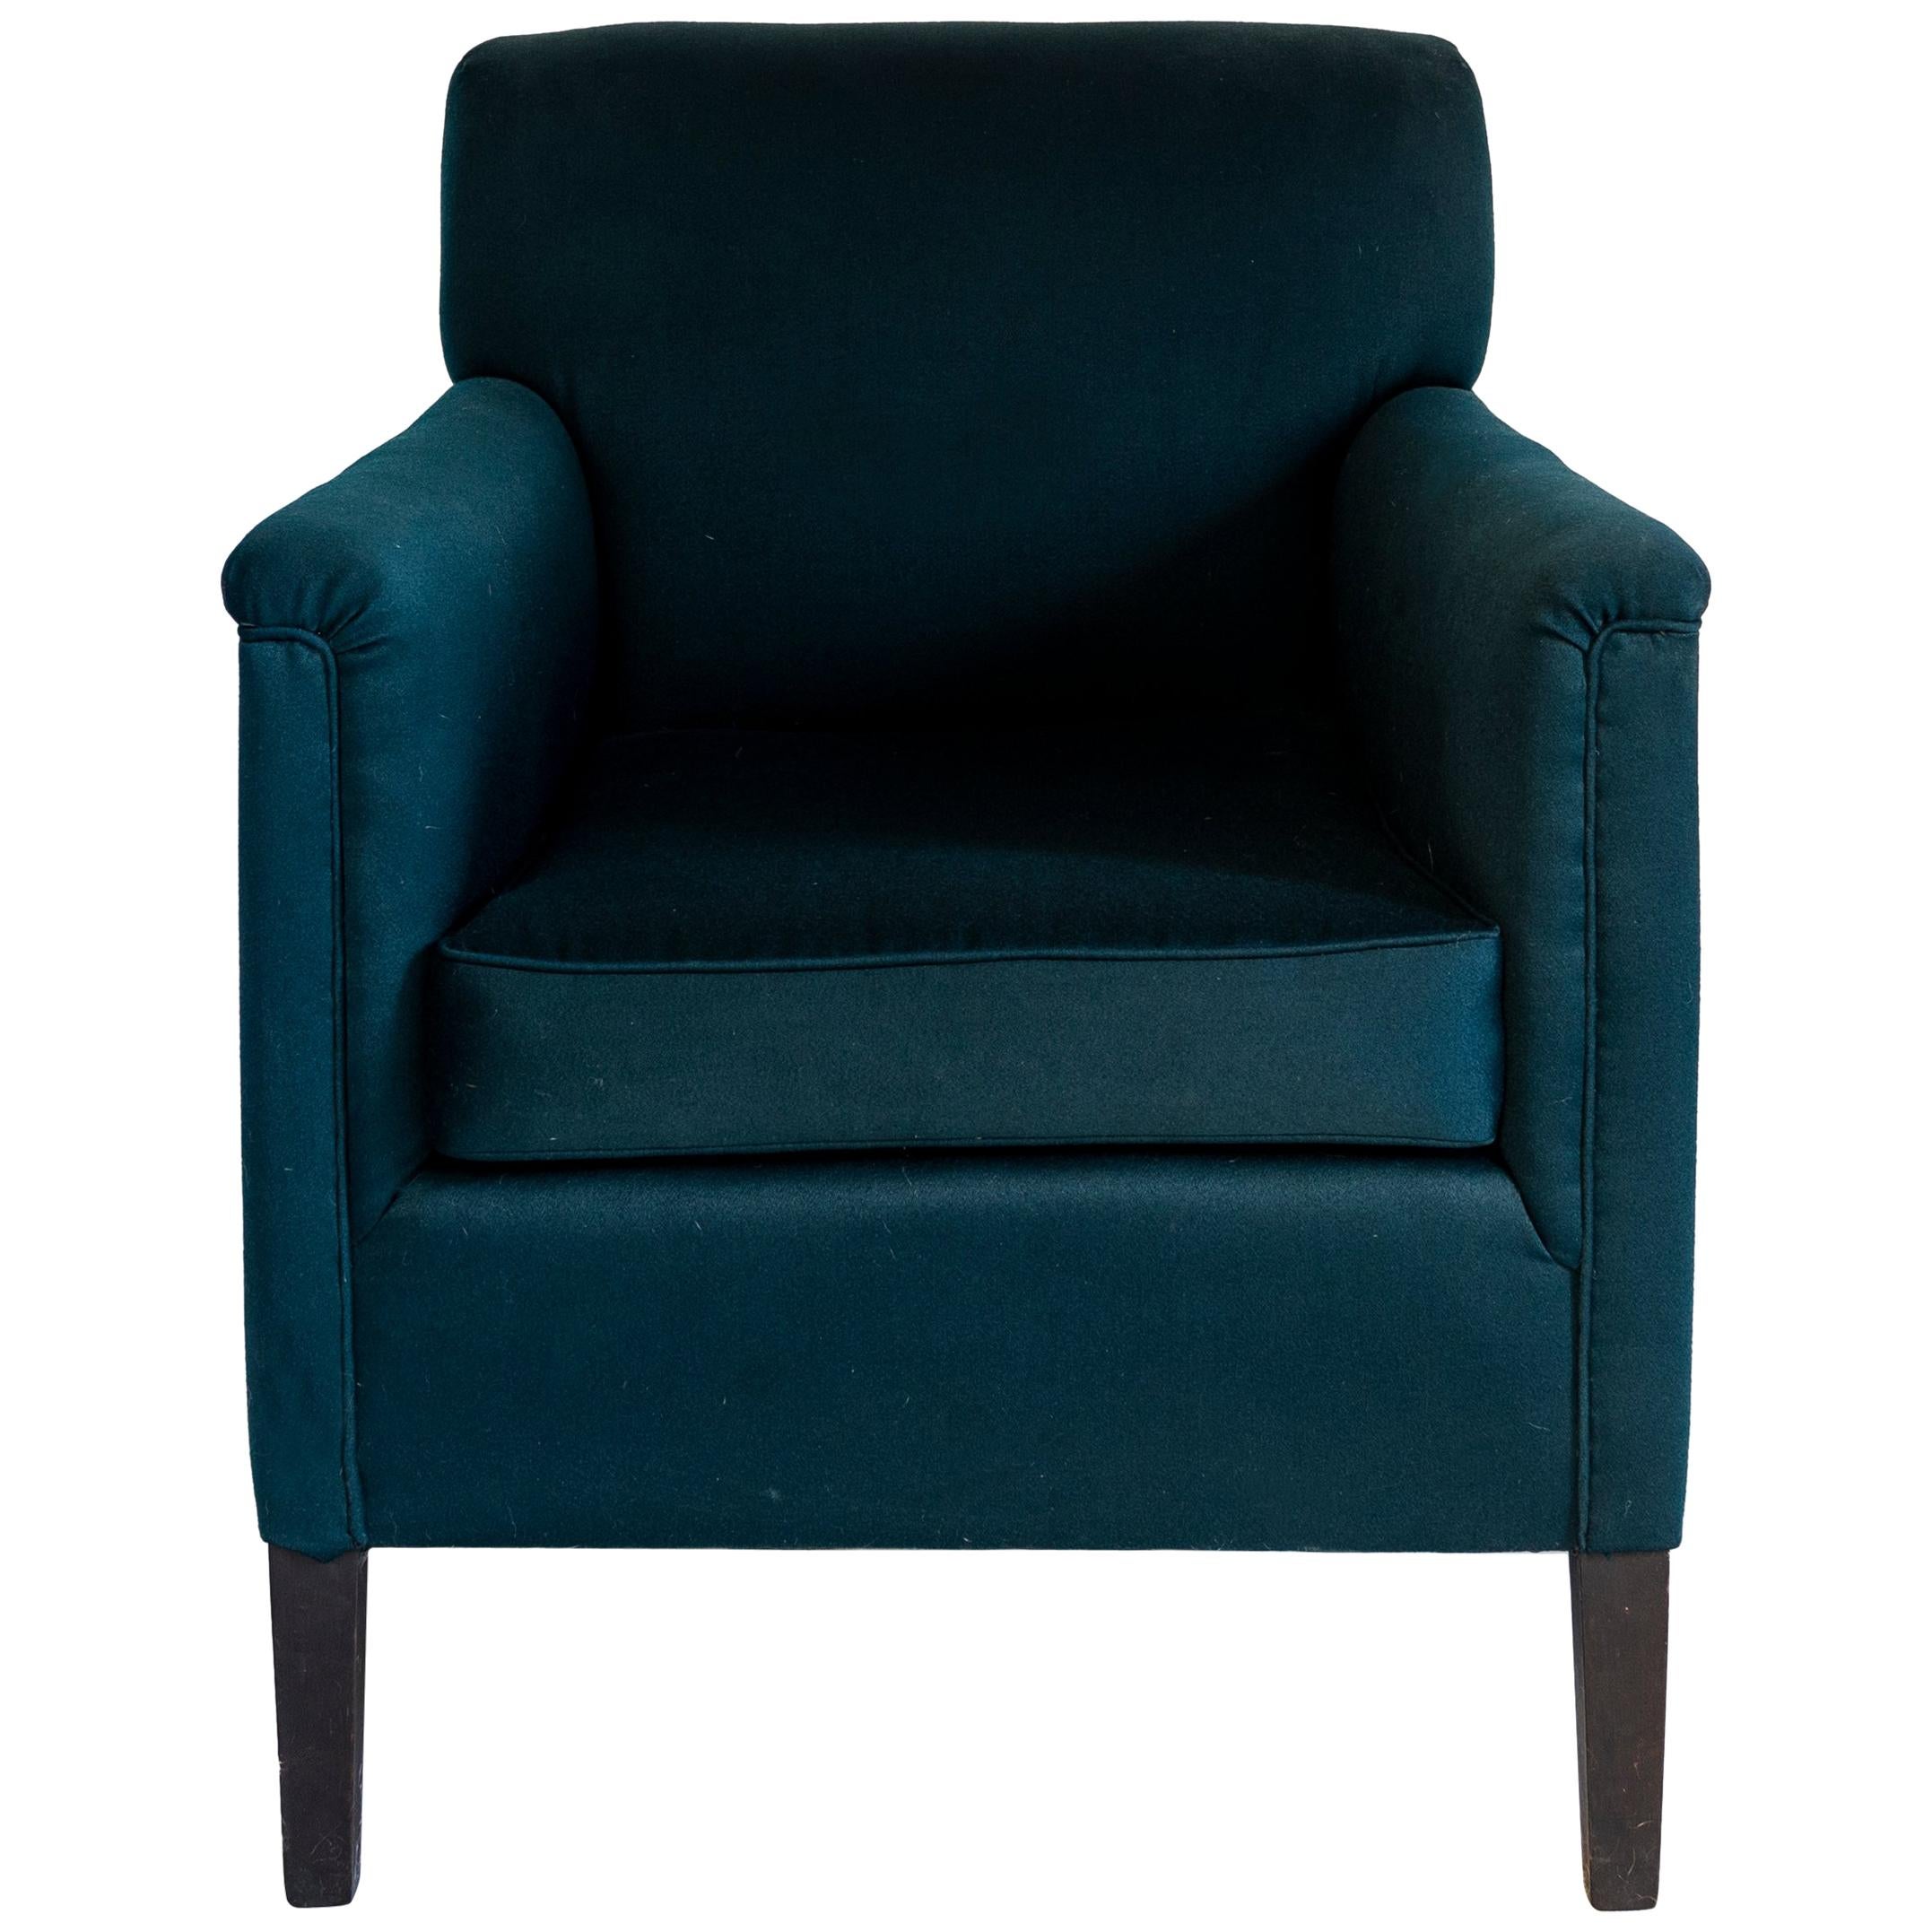 Herbert Upholstered Chair in Wool, Vica designed by Annabelle Selldorf